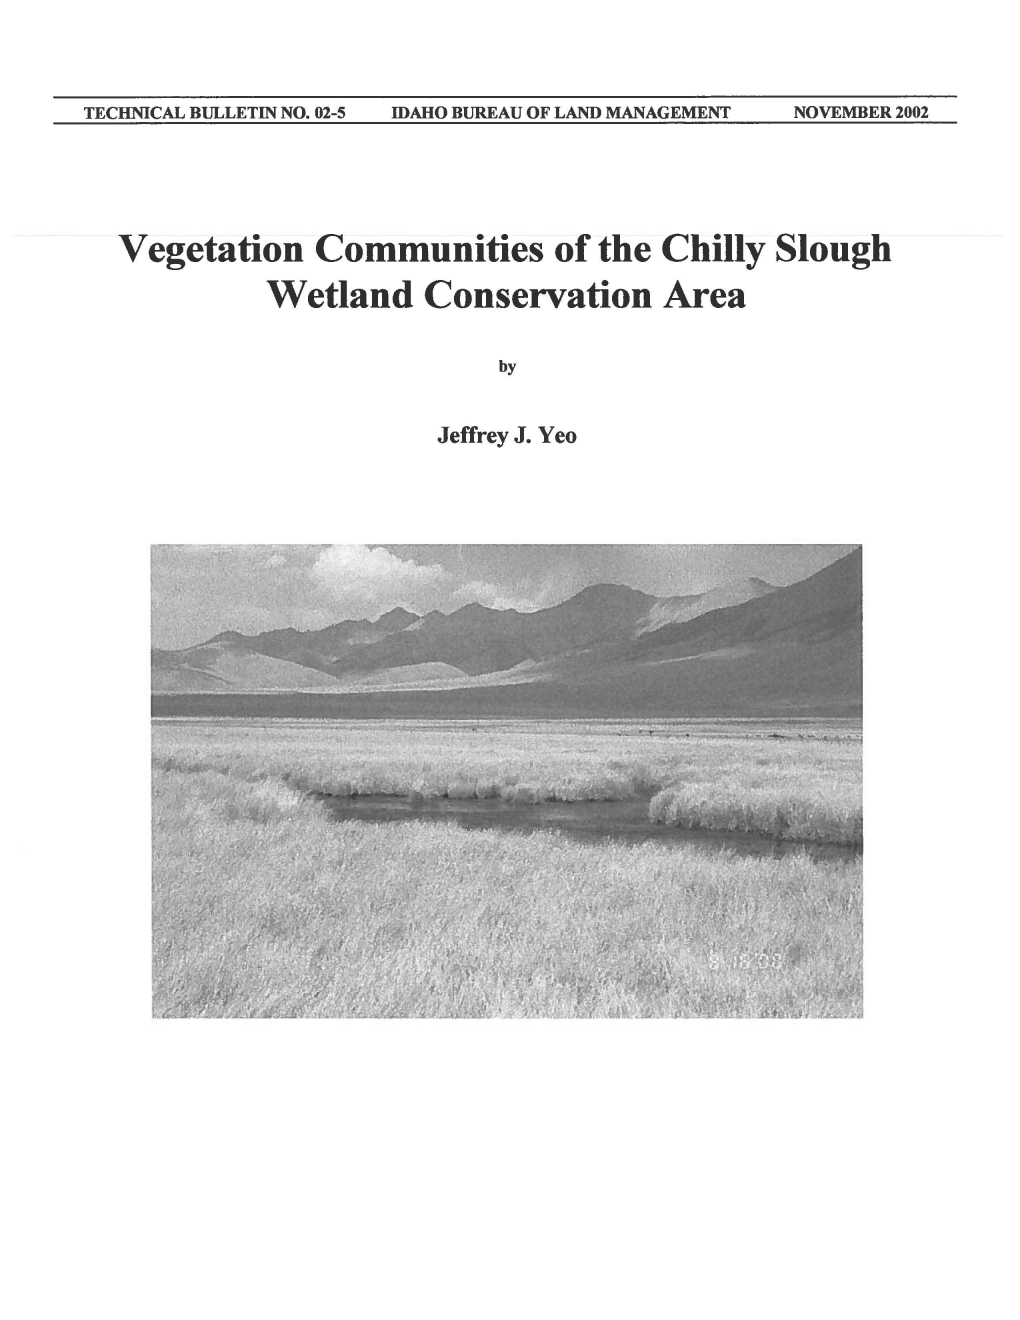 Vegetation Communities of the Chilly Slough Wetland Conservation Area